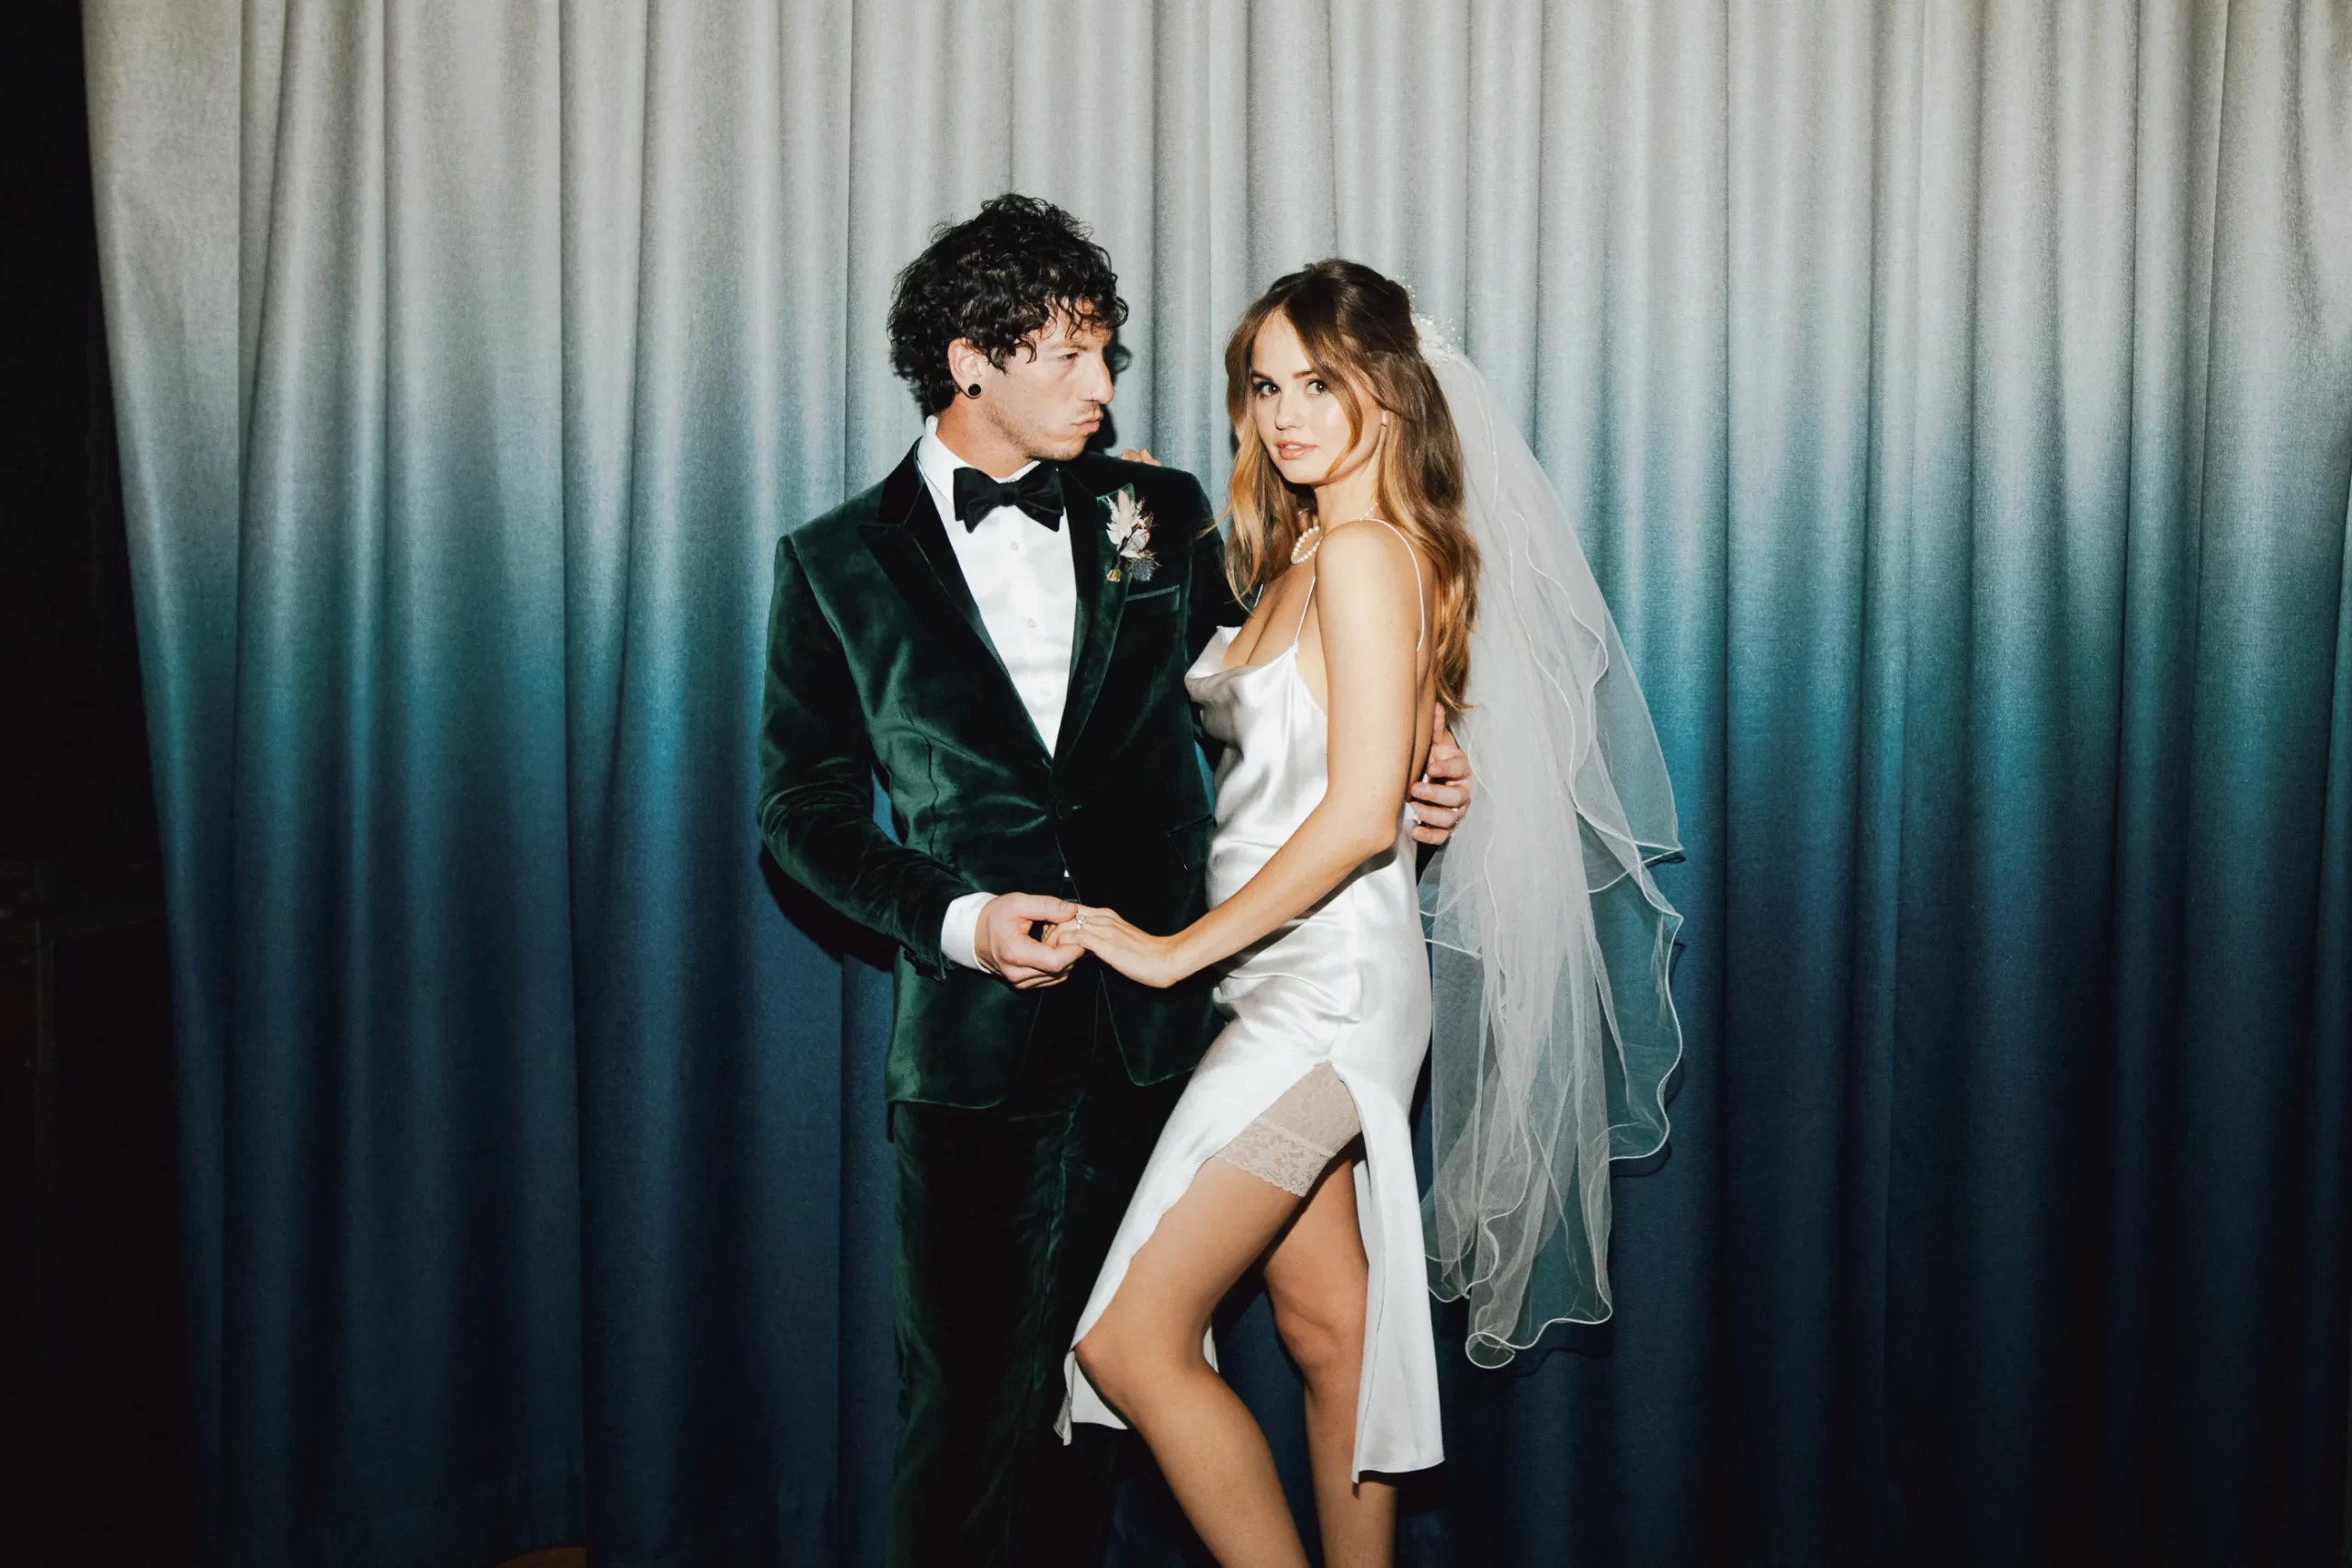 Inside Debby Ryan And Josh Dun's Marriage: Find Out How Long The Couple Has Been Dating, Their Plans For Kids, And More.